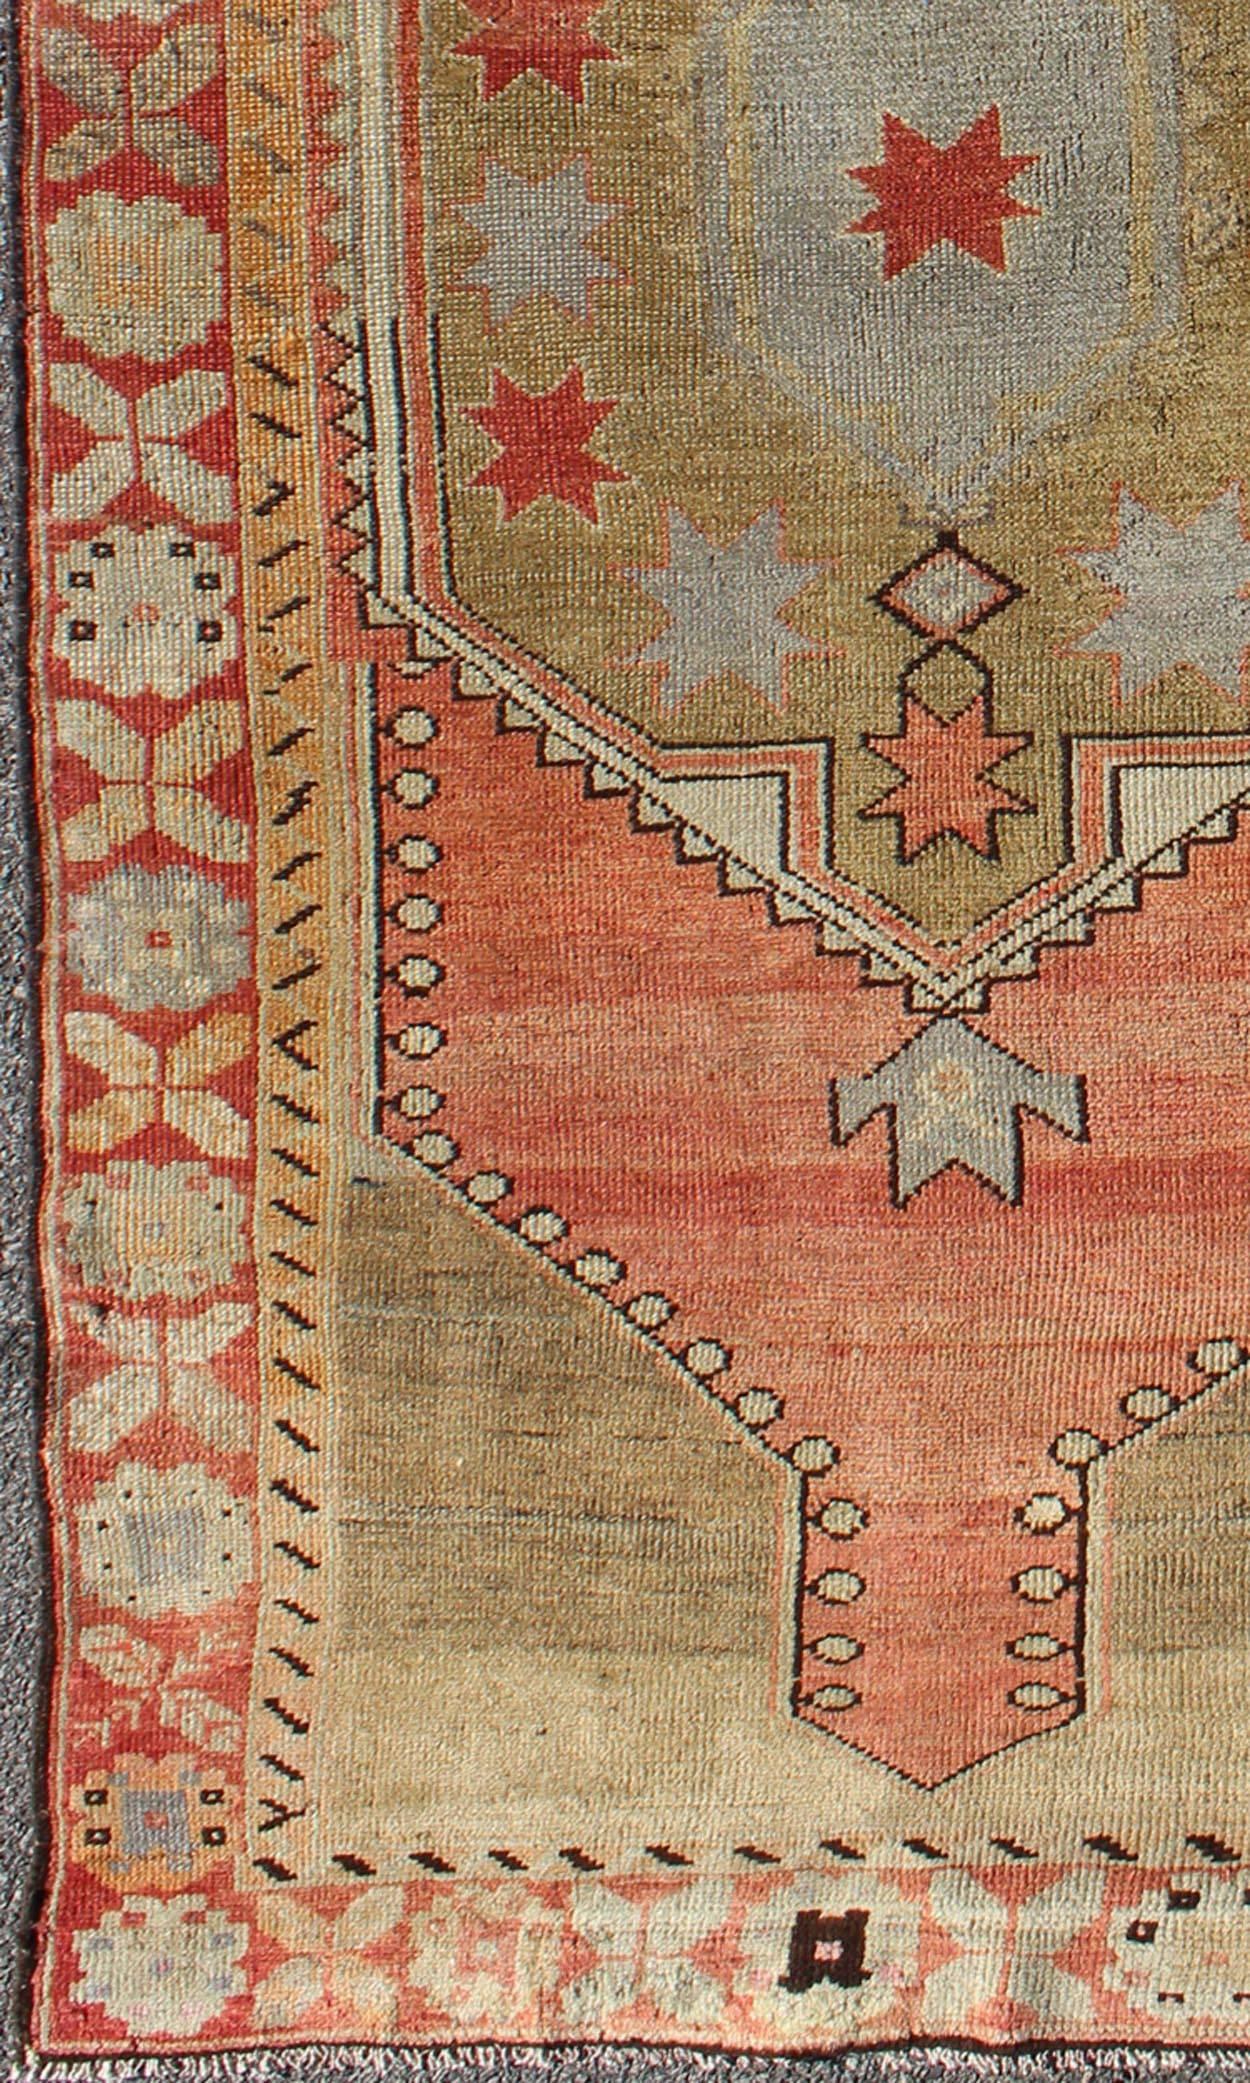 Vintage Turkish Oushak Rug in Faded Red, Camel, Light Blue.
This lovely Oushak features an unusual center medallion in light green with a coral central field, characterized by floral blossoms and trellis motifs. The softly-hued coral border repeats